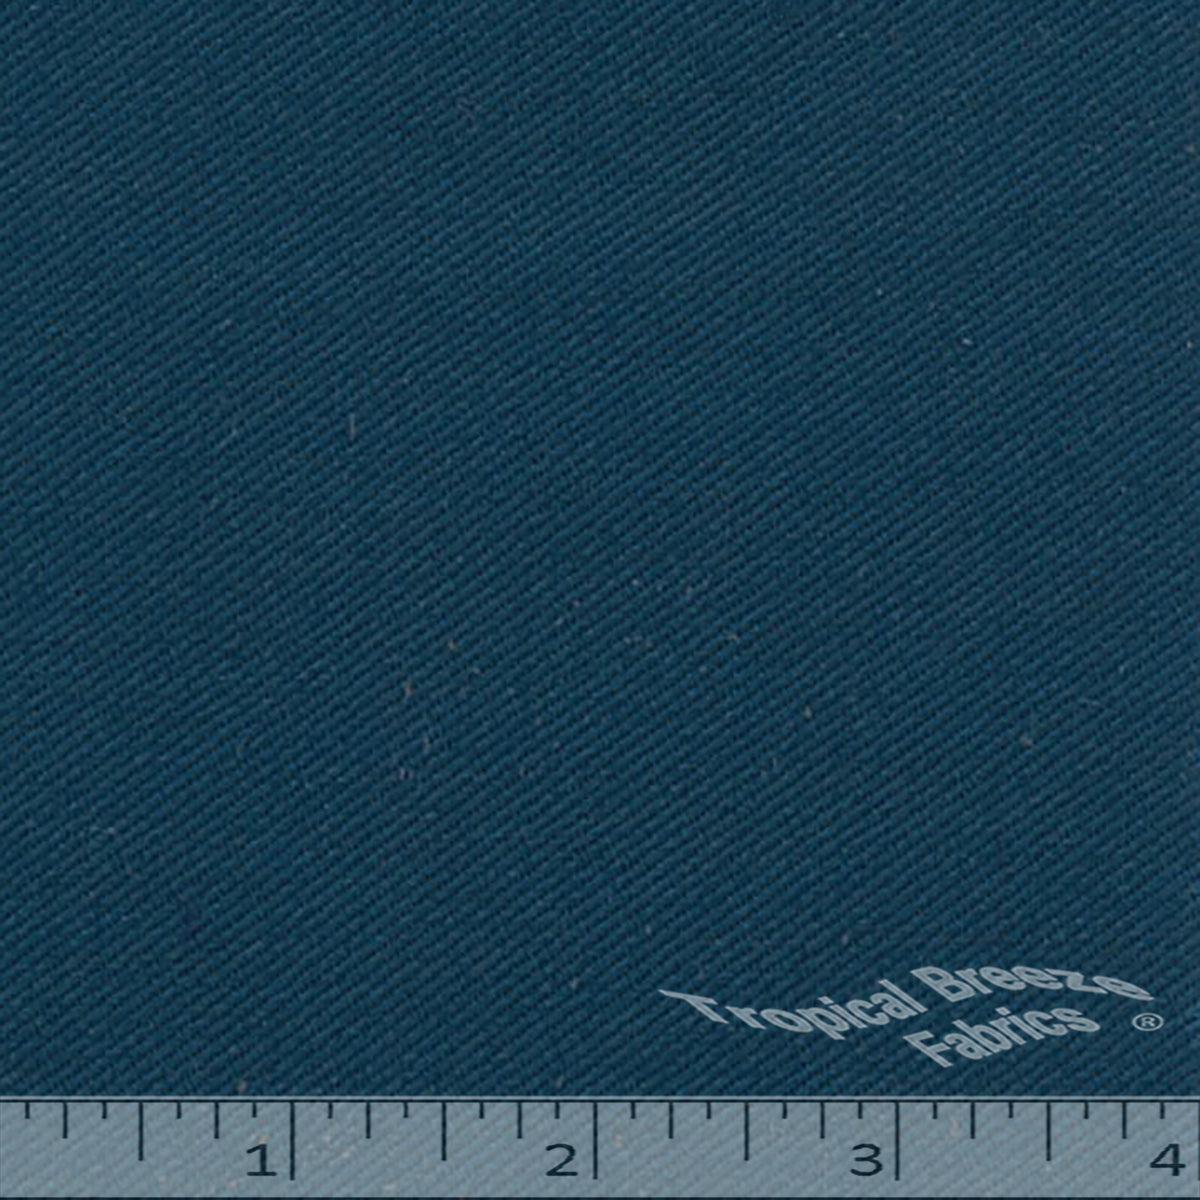 Canvas Duck Fabric 10 oz Dyed Solid Navy Blue / 54 Wide/Sold by The Yard